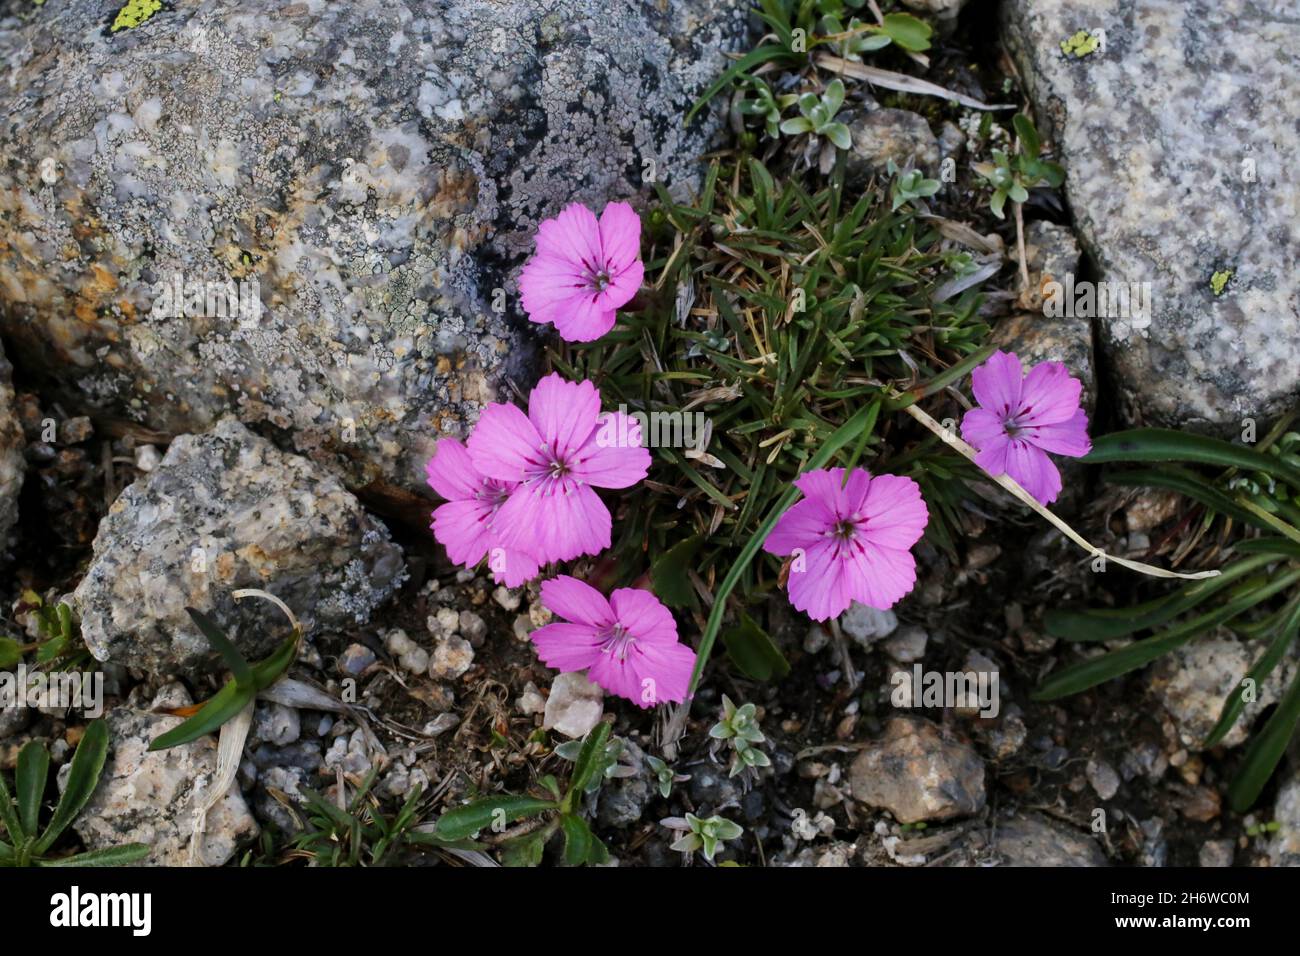 Dianthus microlepis, Caryophyllaceae. Wild plant shot in summer. Stock Photo